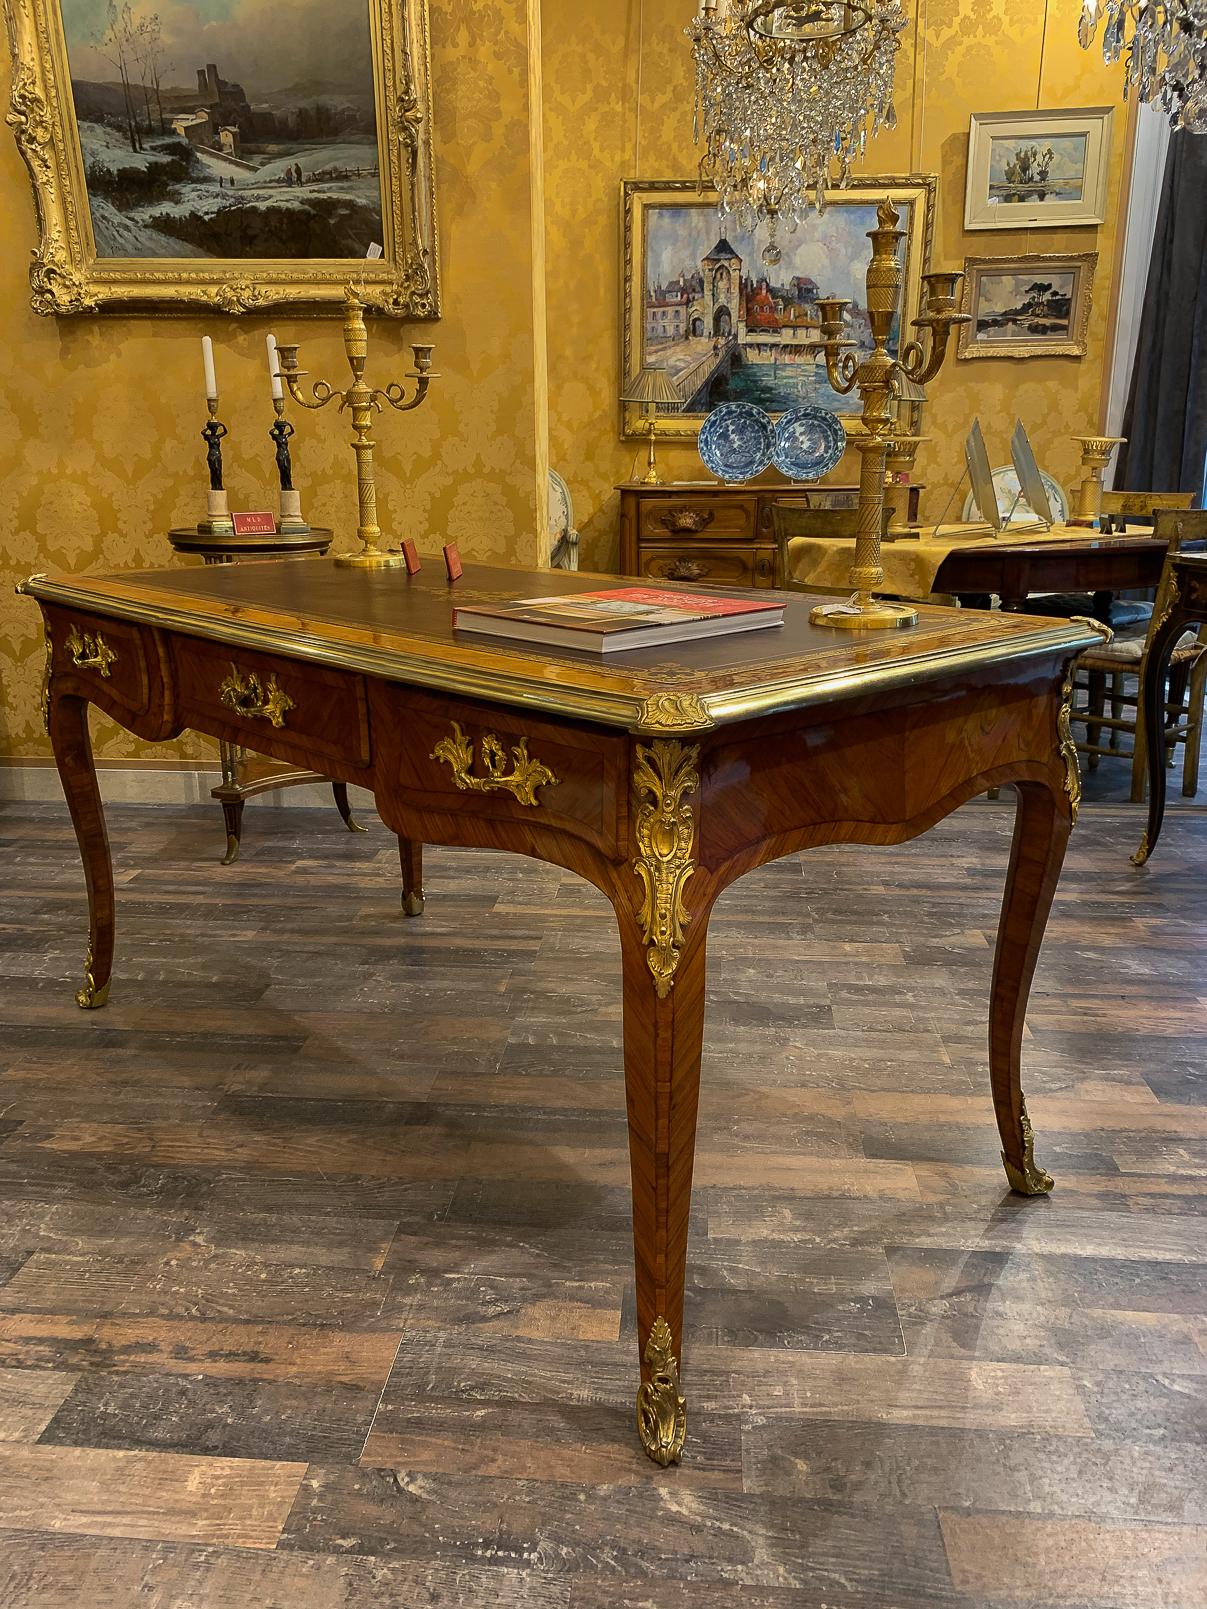 French Louis Period, flat violetwood desk with gilt bronze decoration, circa 1740-1750.

A beautiful and decorative all sides veneered in violetwood flat-desktop. In one side, it opens by three drawers, on the opposite side three false drawers.